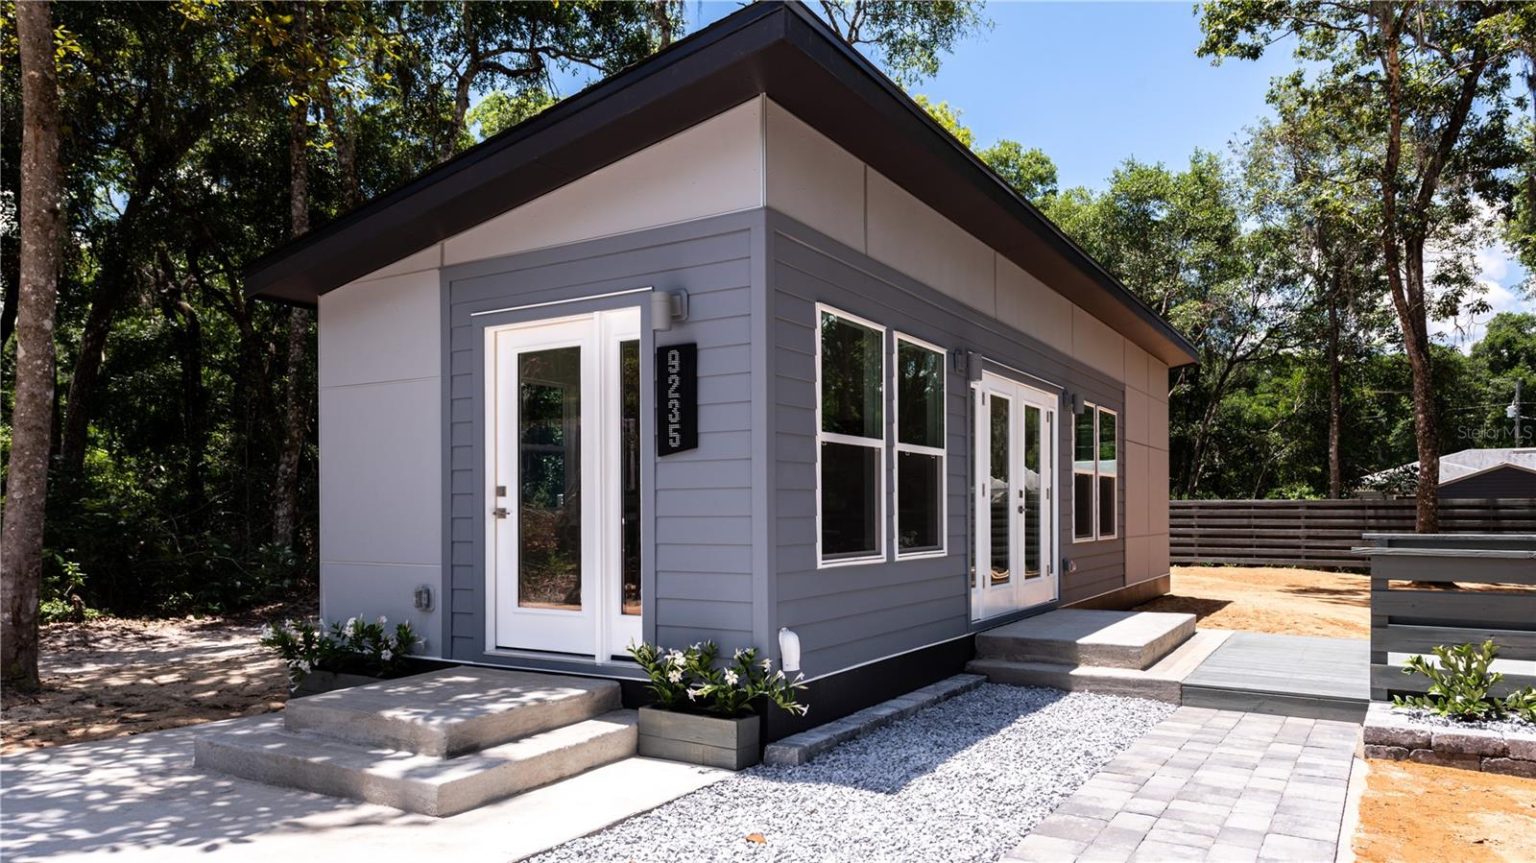 Tiny Homes In Florida For Sale Hgtv Tiny House For Sale In Florida ...